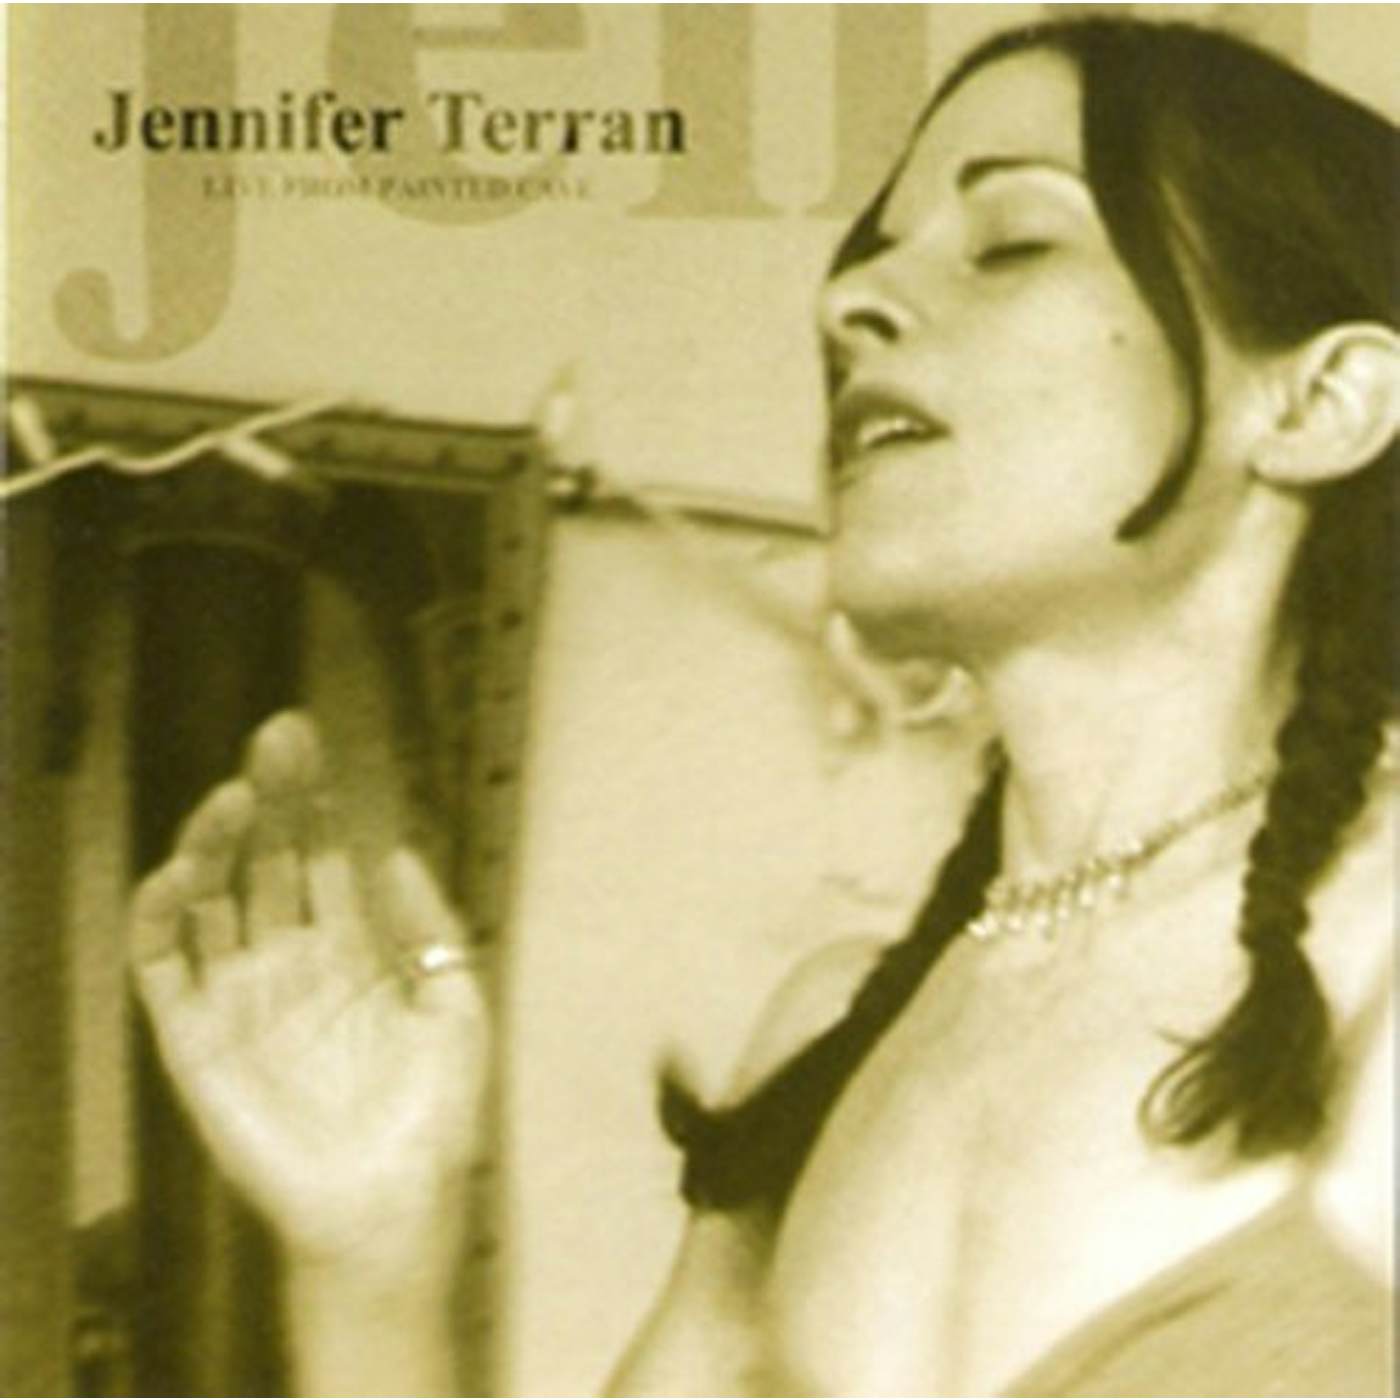 Jennifer Terran LIVE FROM PAINTED CAVE CD